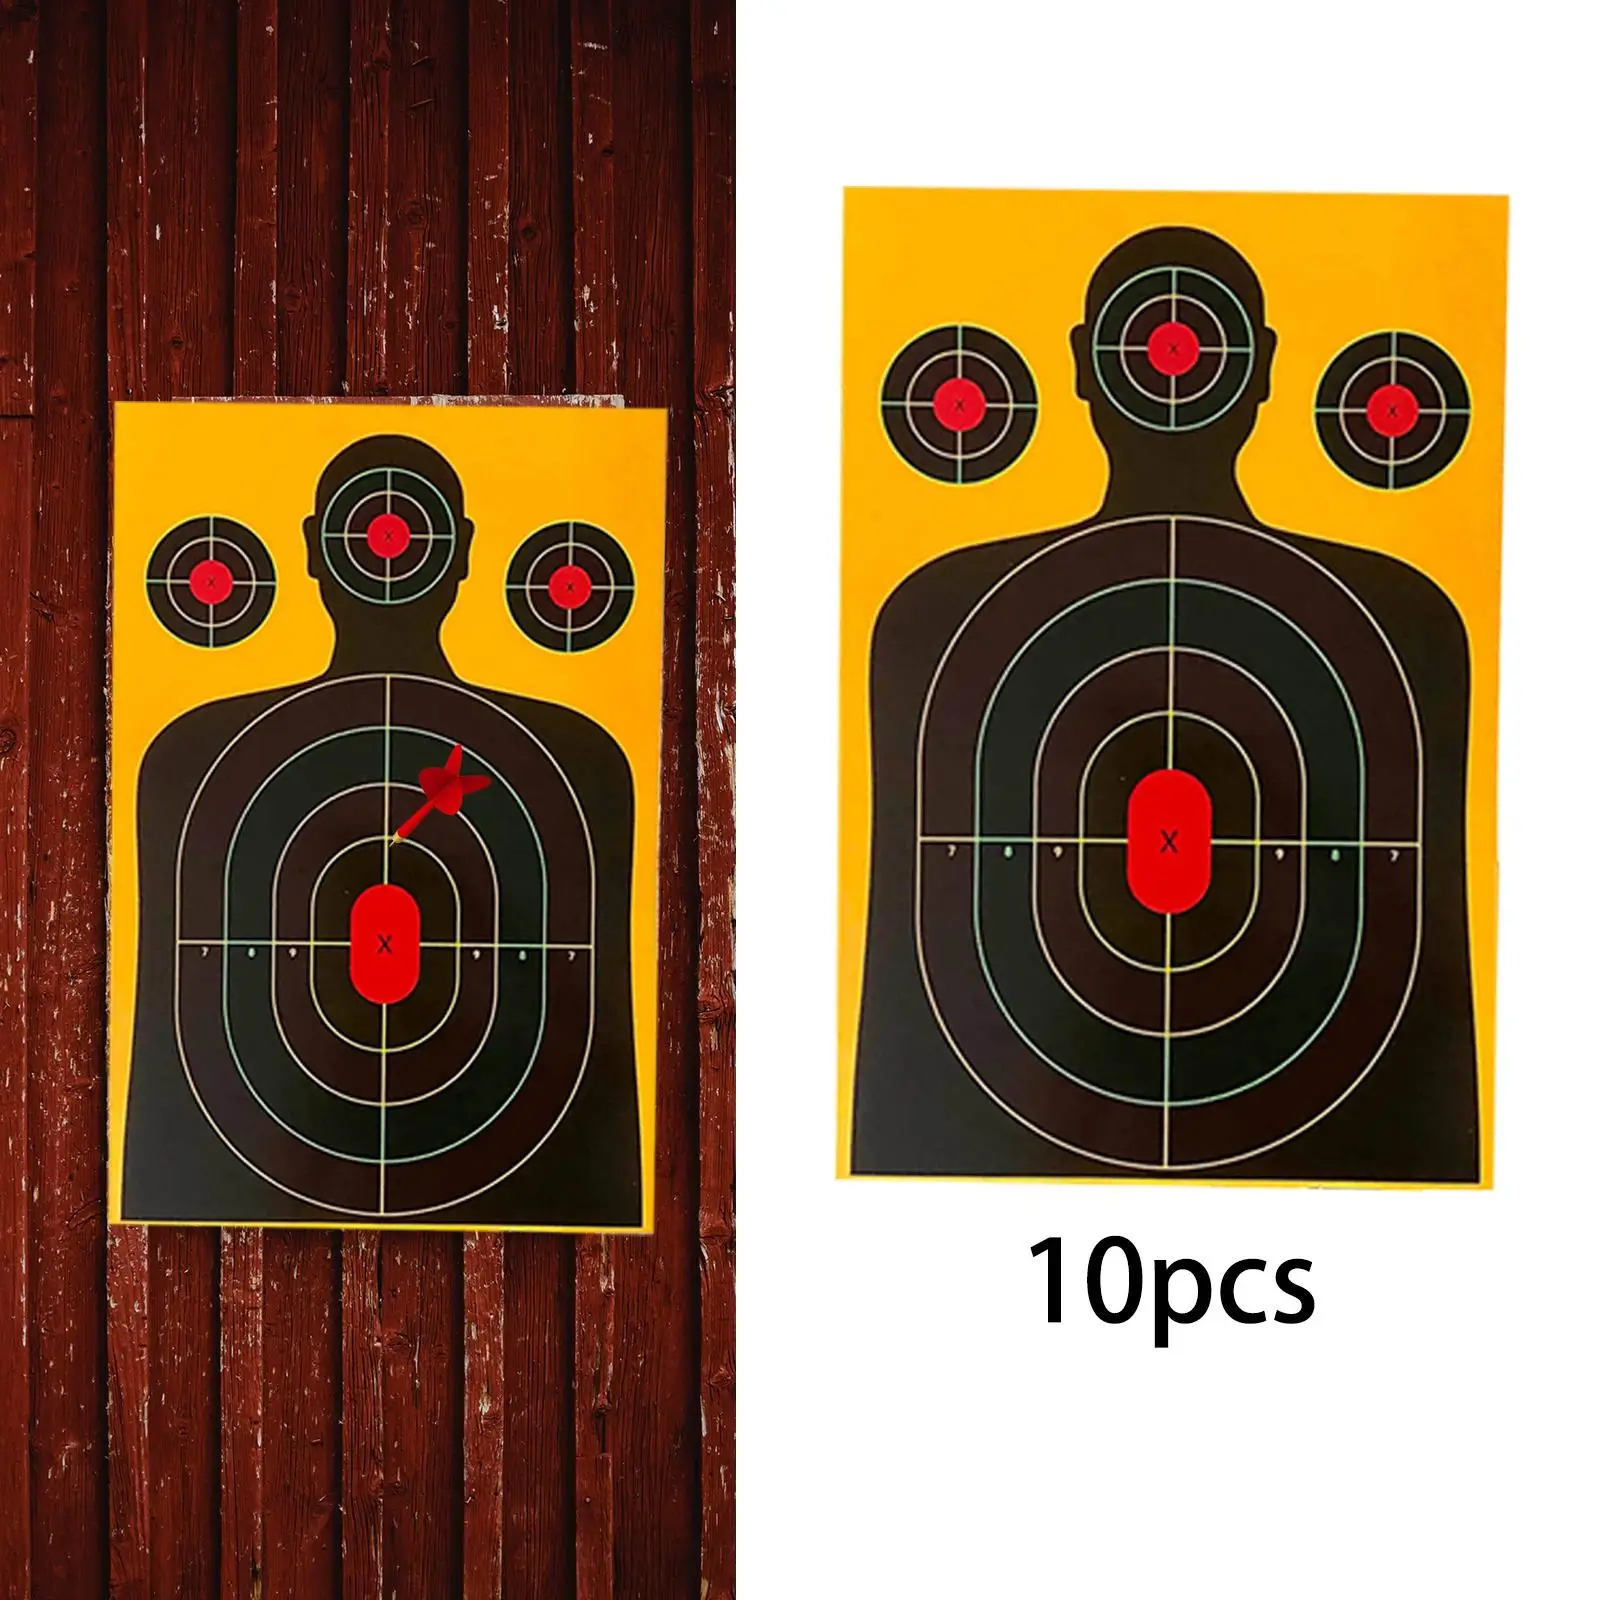 10 Pieces Silhouette Target Wargame Professional Hunting Silhouette Target